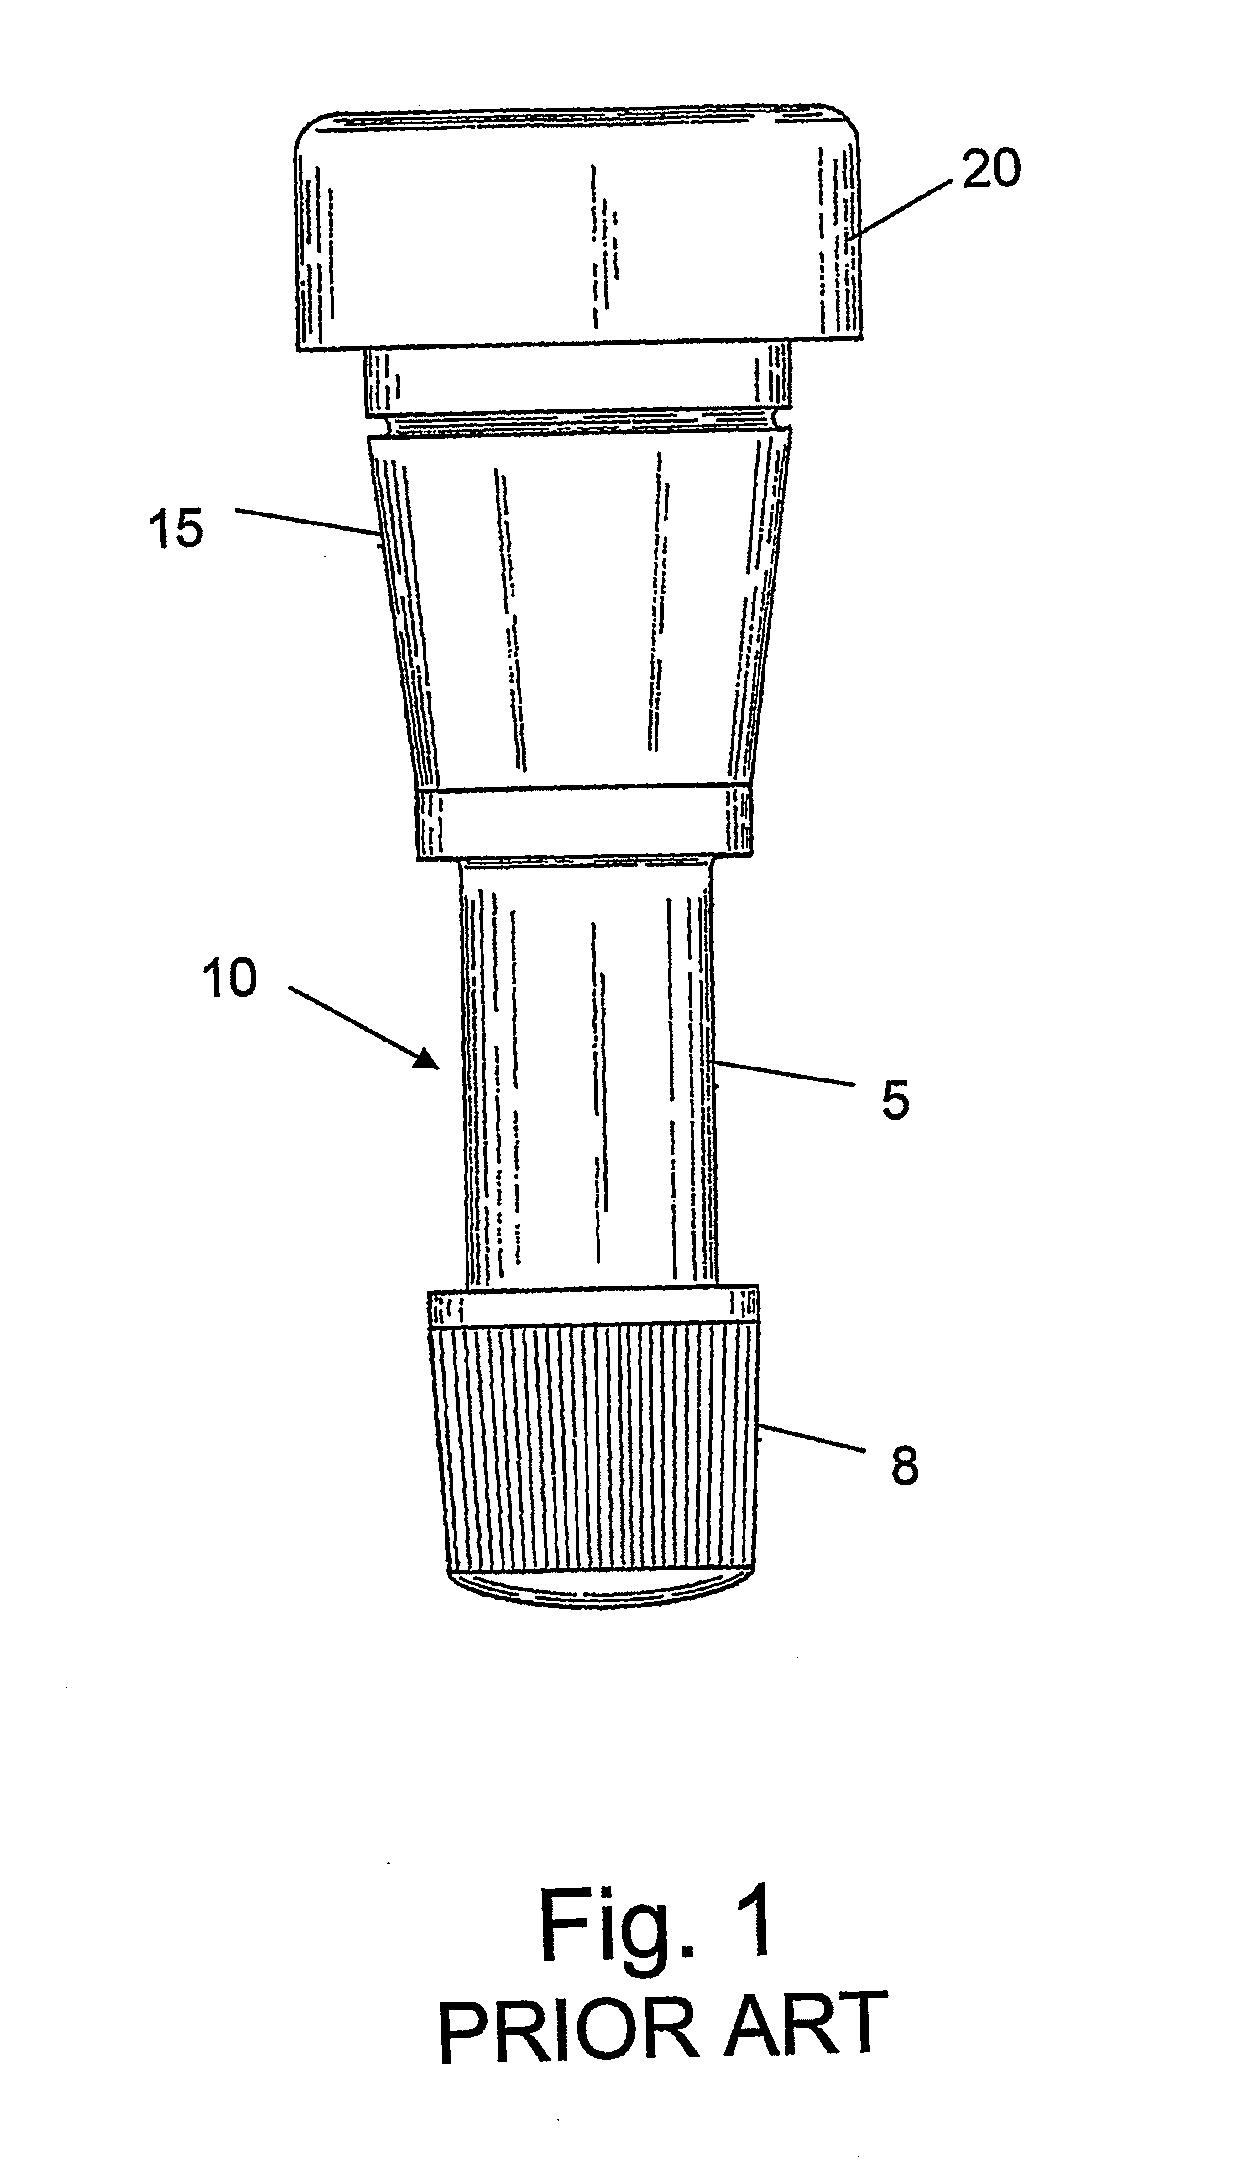 Tire valve assembly, system and apparatus for deflating a tire following unauthorized access to a motor vehicle